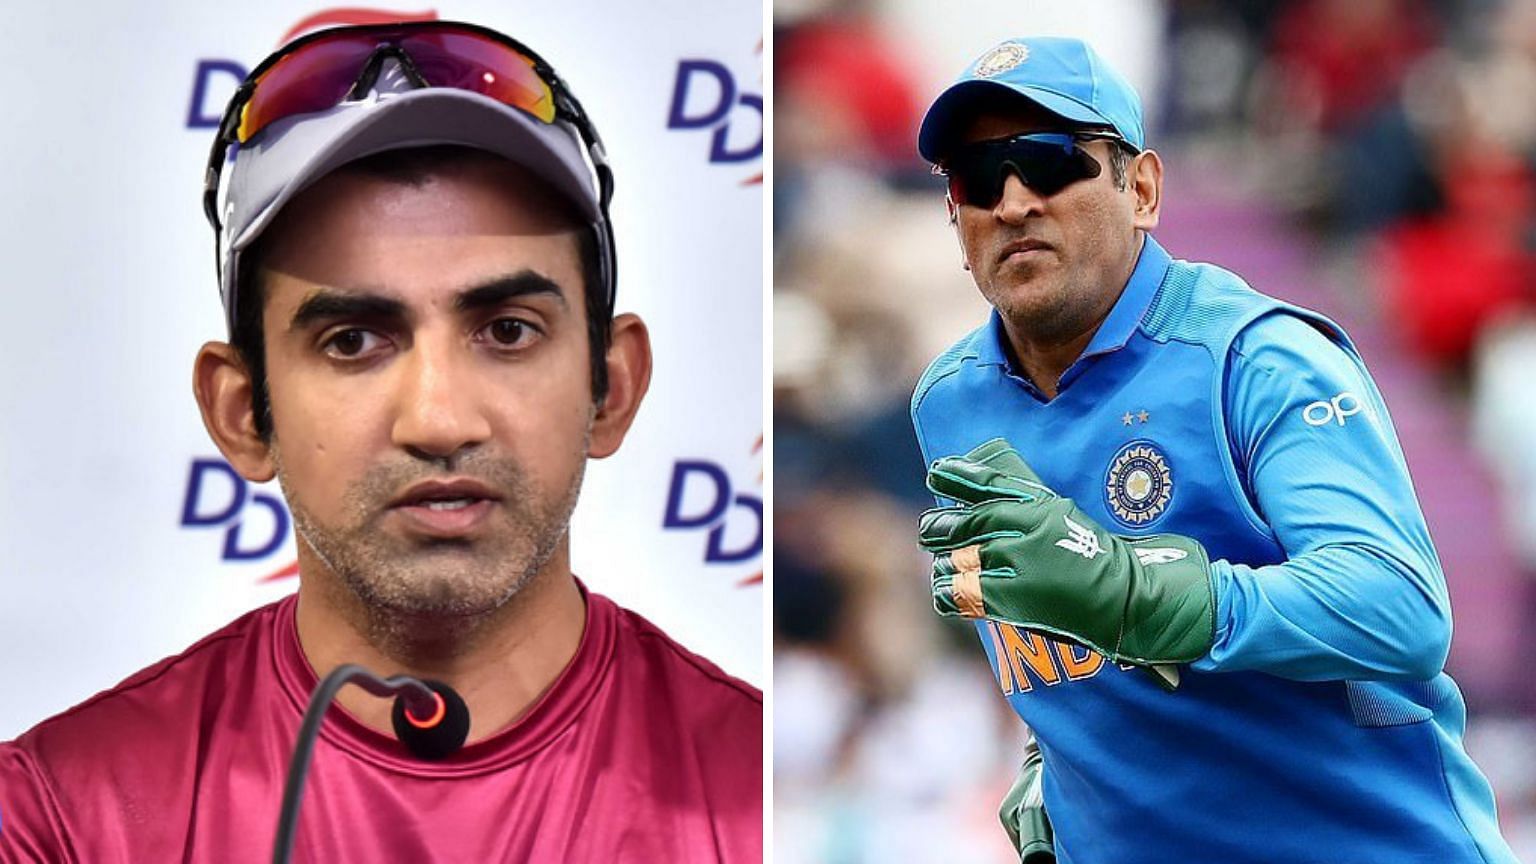 Gambhir has backed MS Dhoni over the recent glove row.